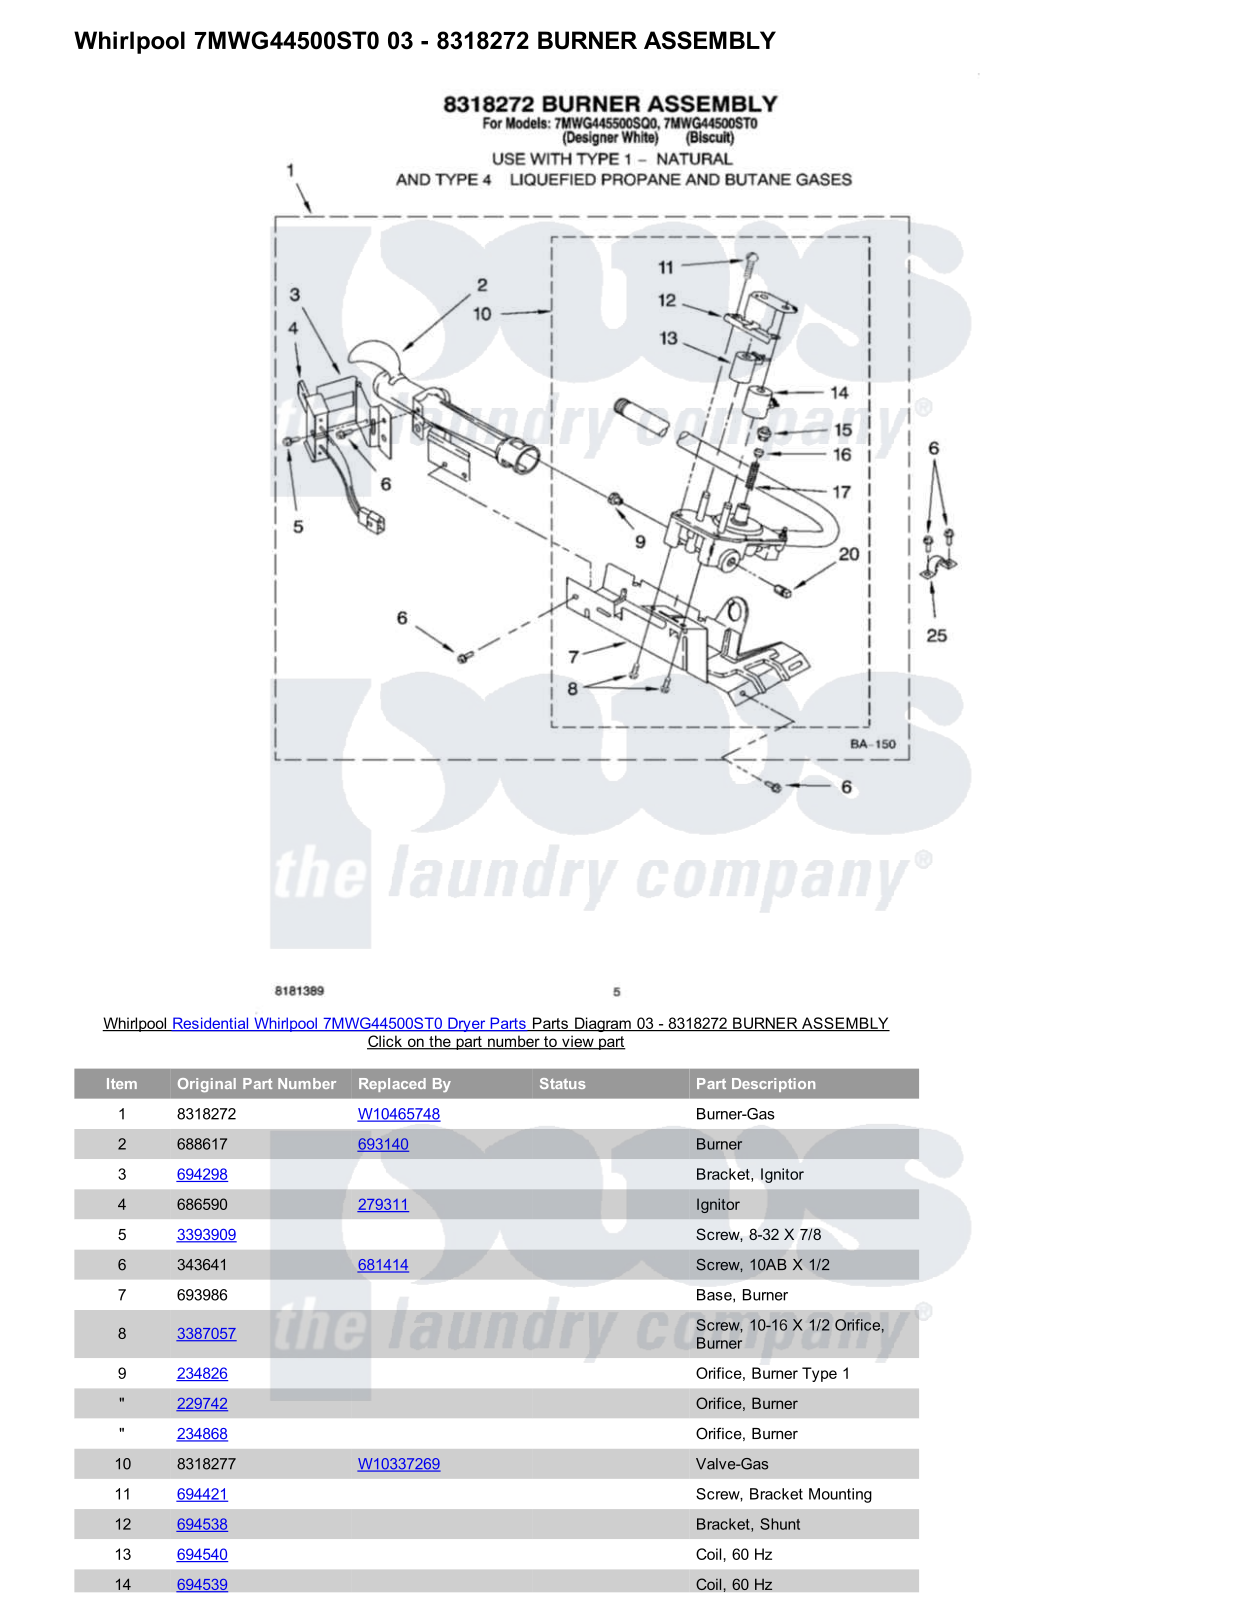 Whirlpool 7MWG44500ST0 Parts Diagram